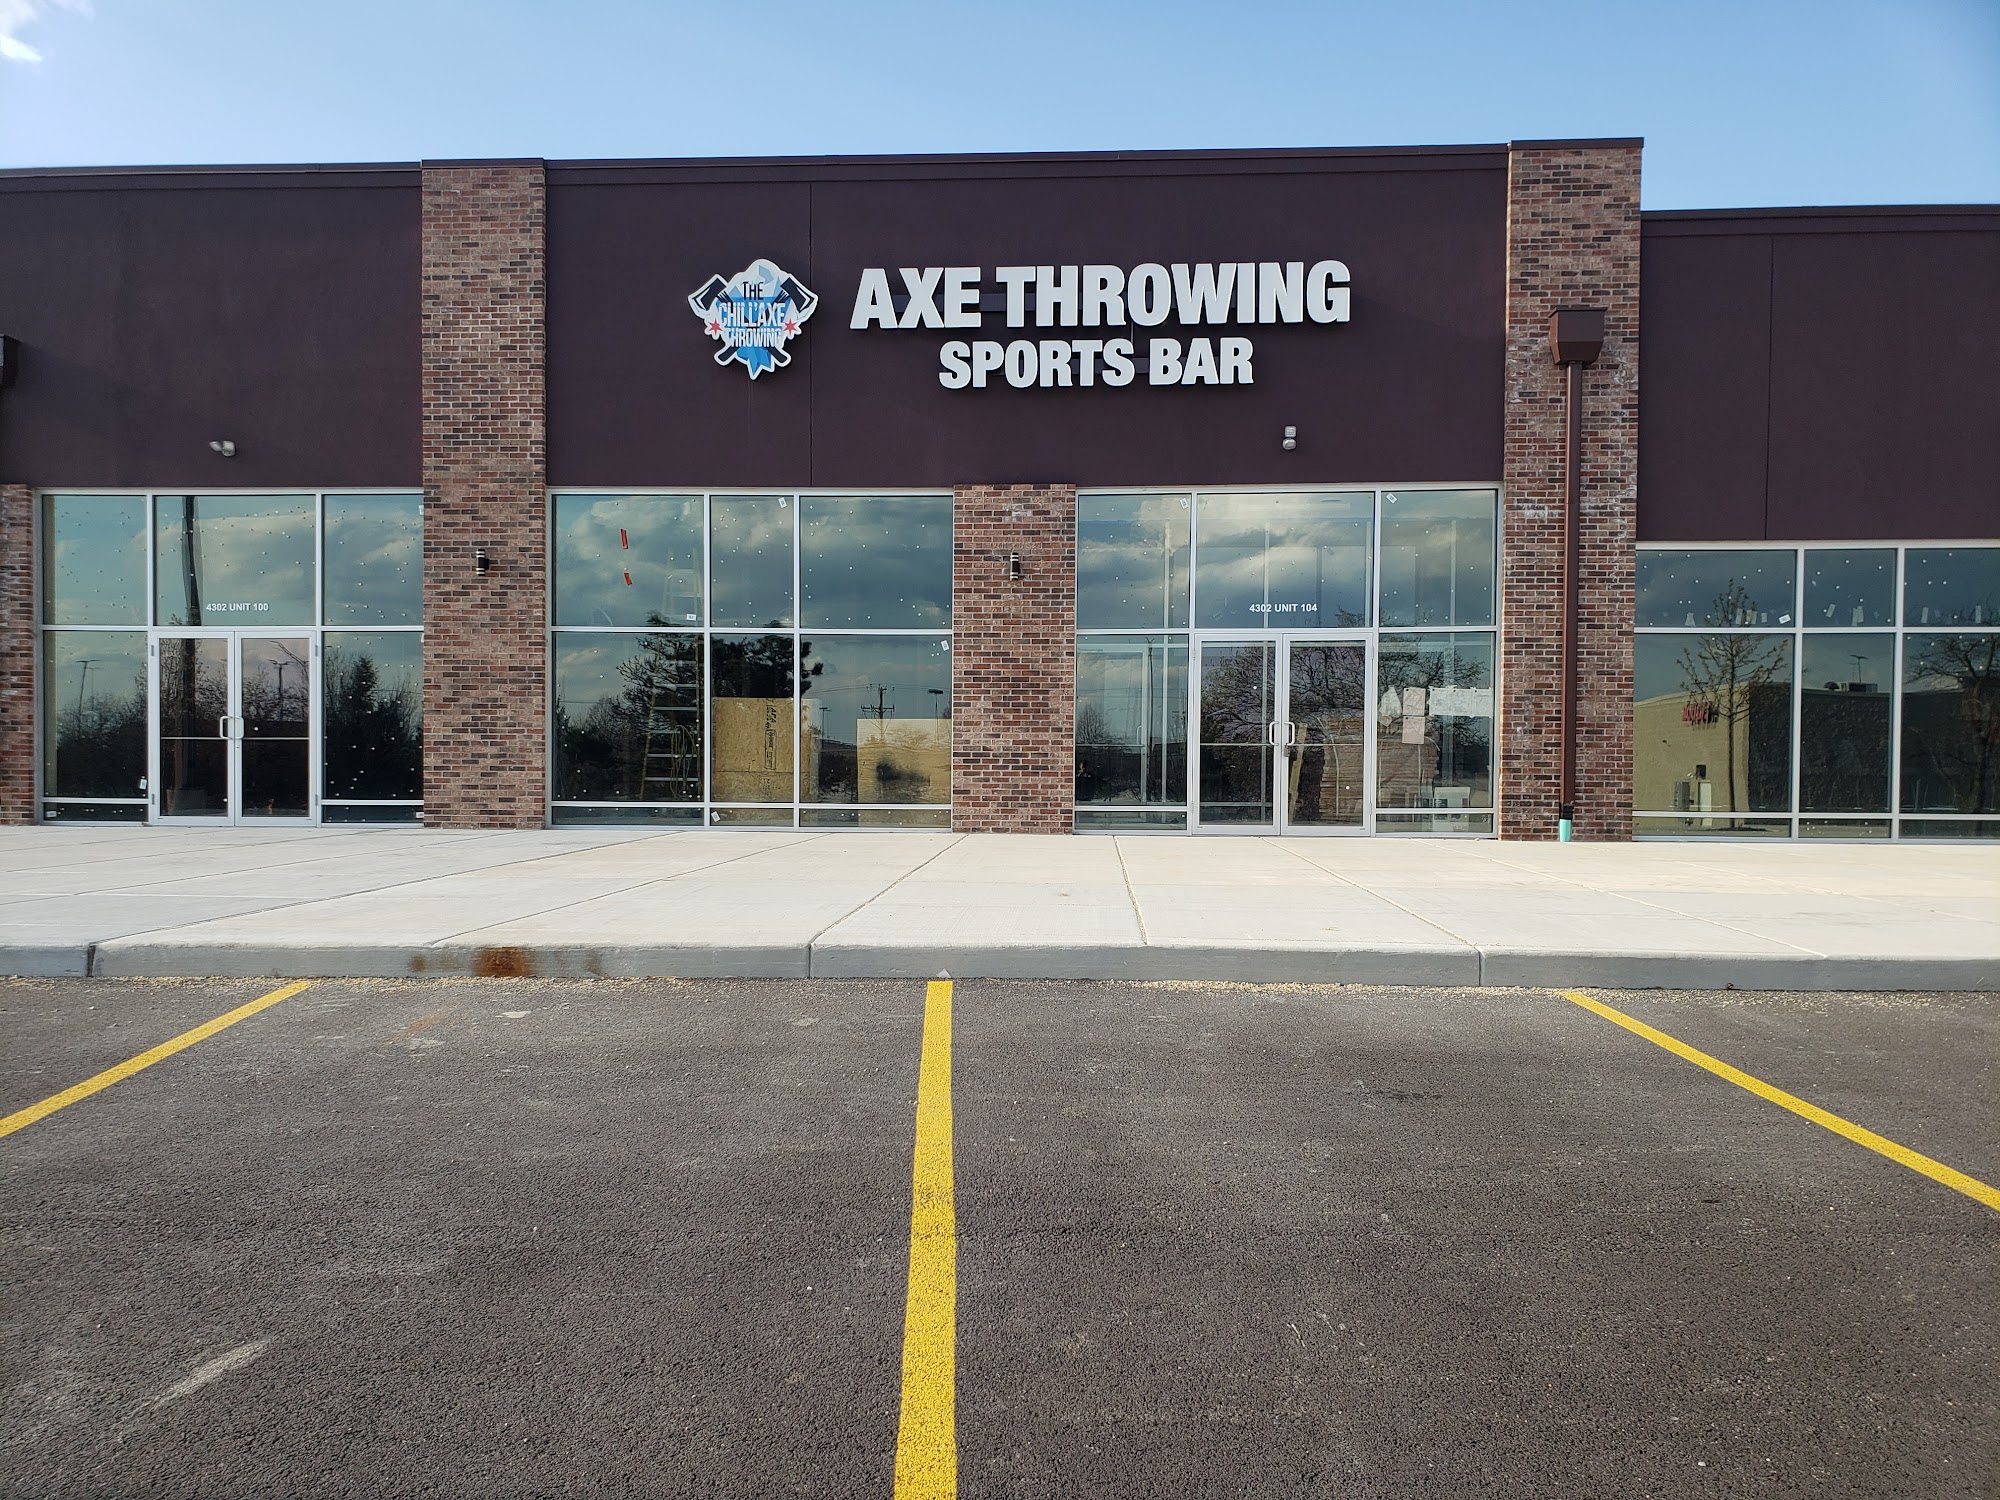 The Chill'Axe Throwing (Sports Bar)